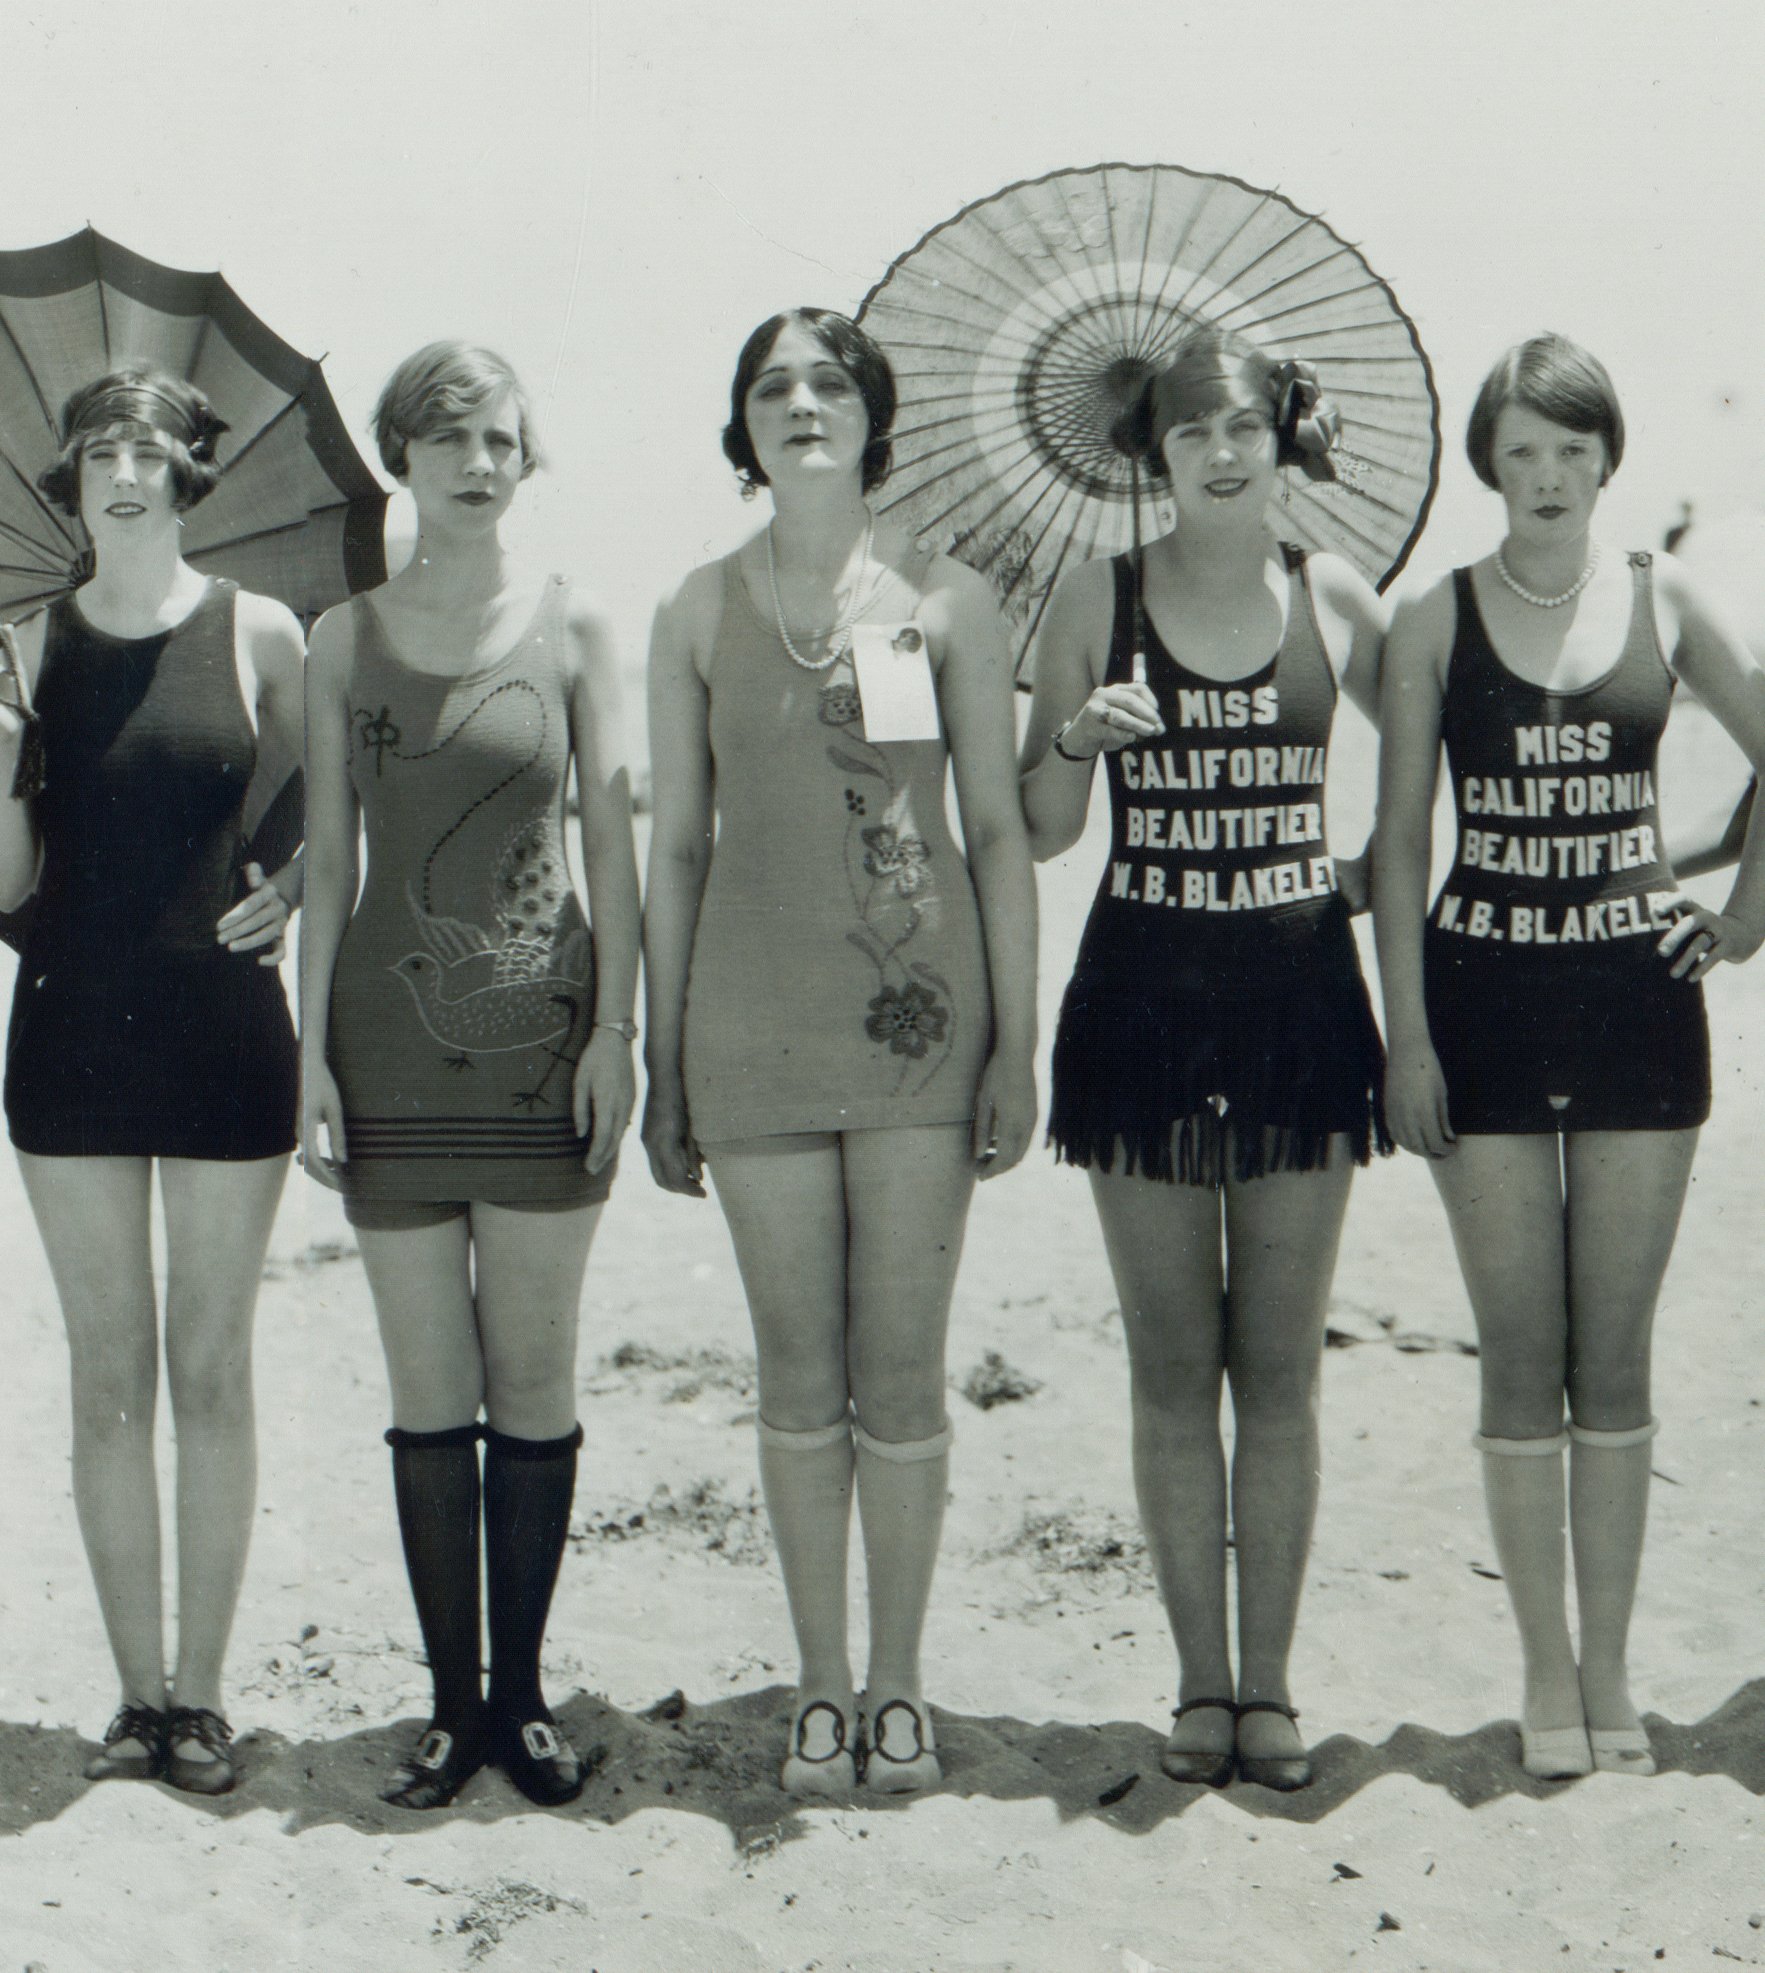 1920 Bathing Beauty in Swimsuit Vintage/ Old Photo 13 x 19